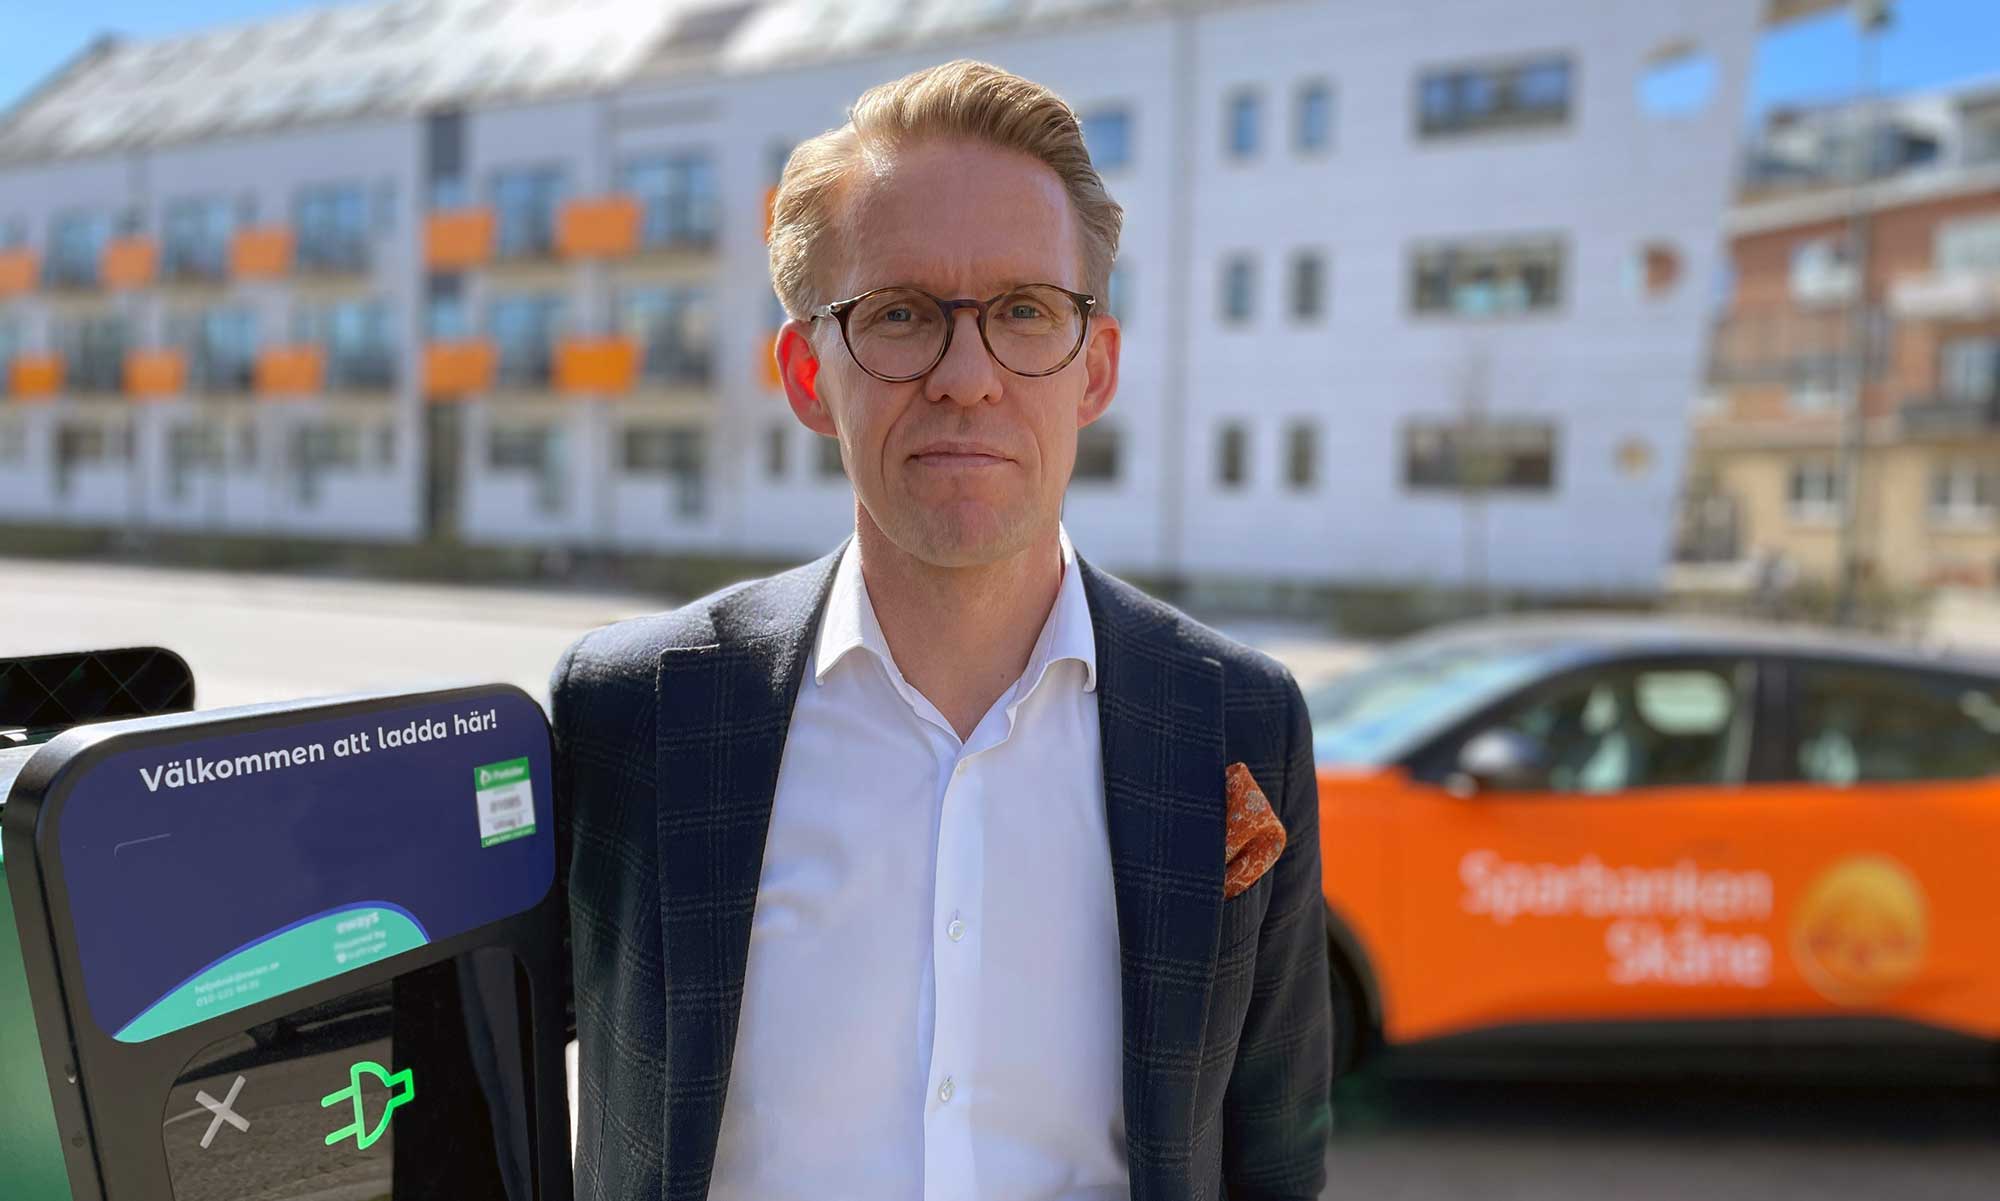 Johan Fjelkner and a electric car and carcharger.